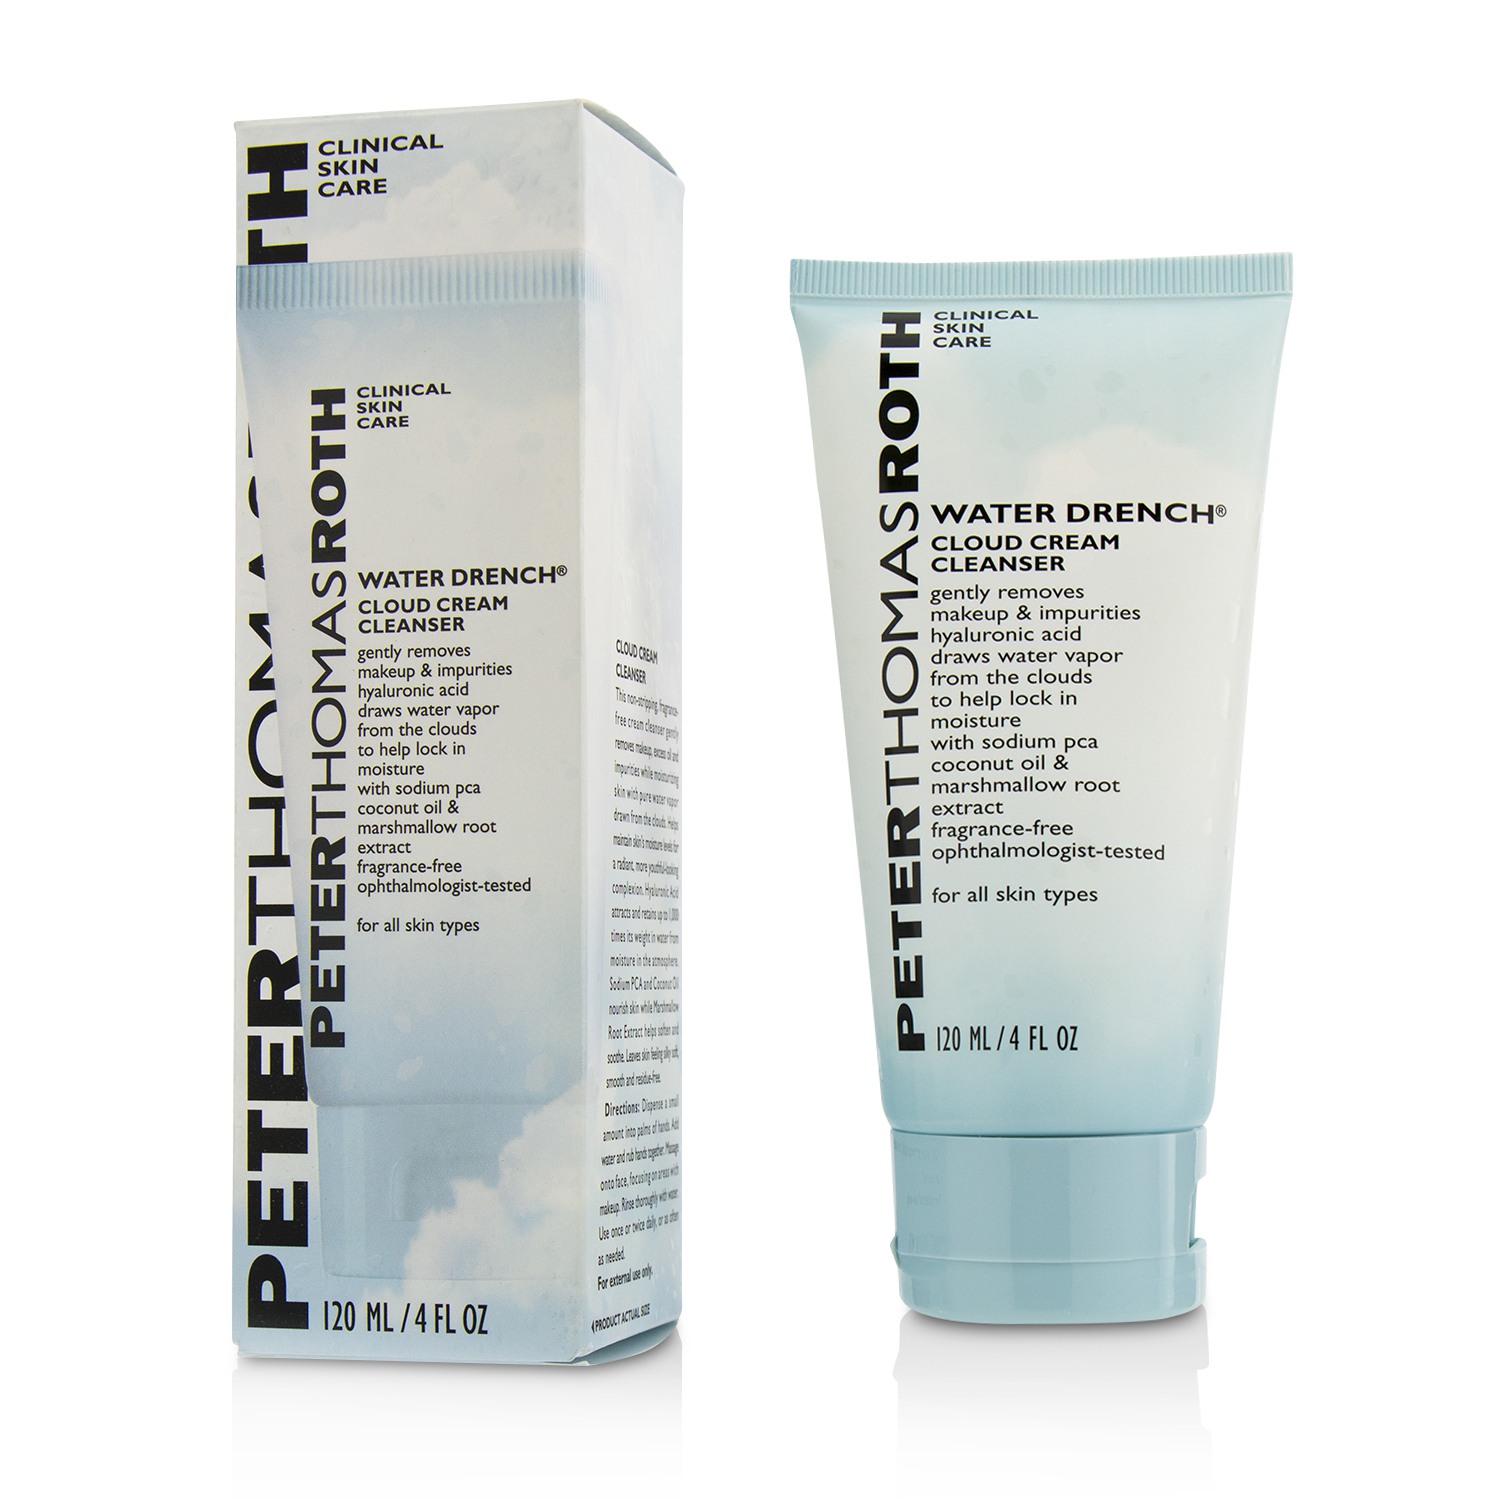 Water Drench Cloud Cream Cleanser Peter Thomas Roth Image